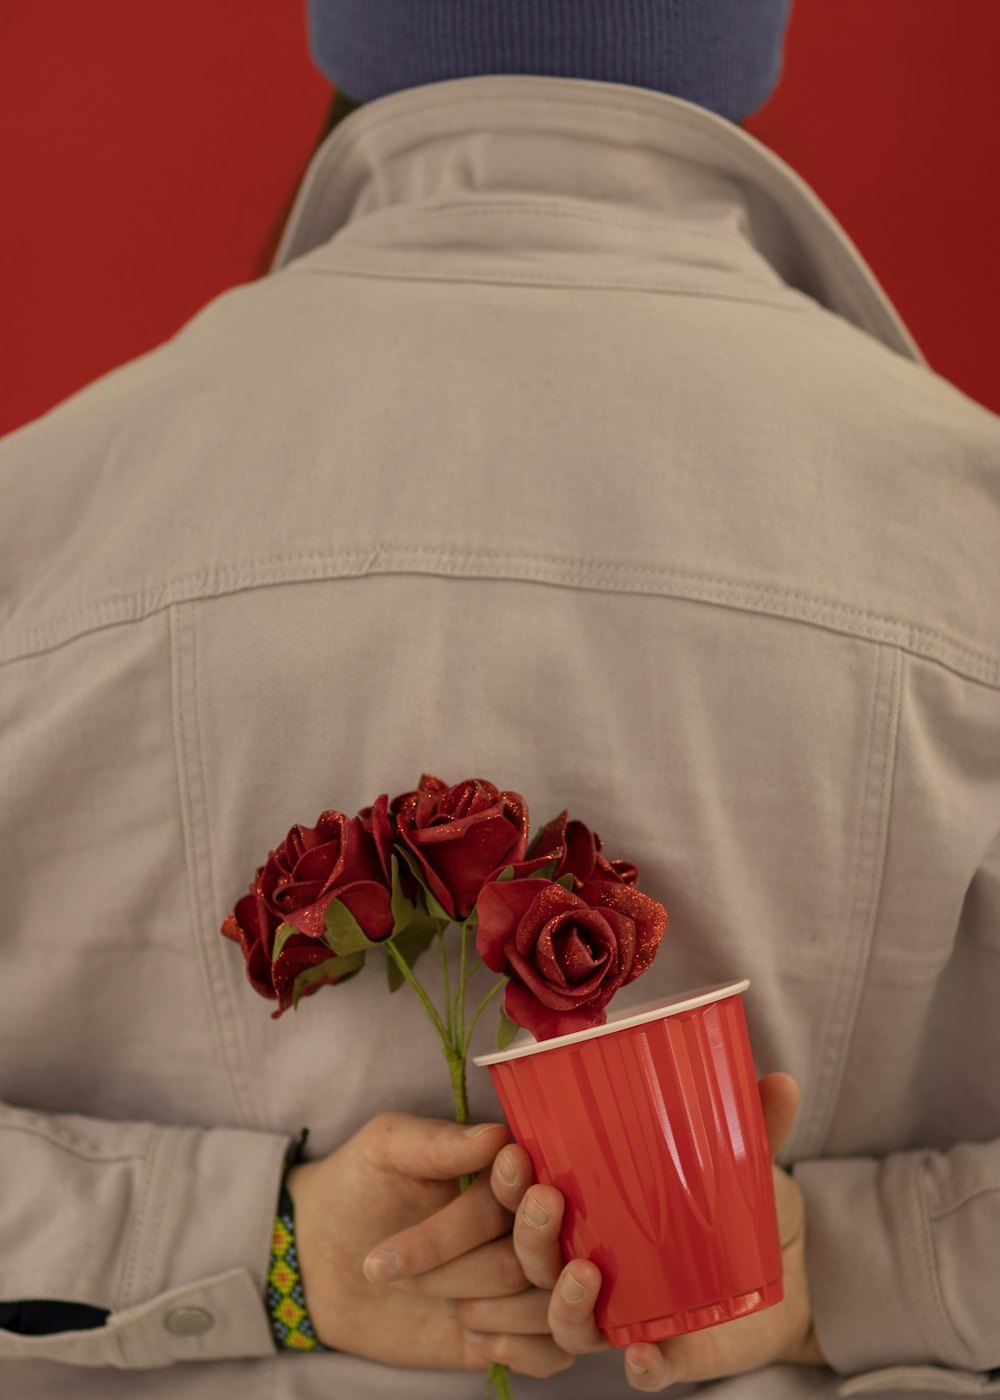 person holding red mug and red flowers